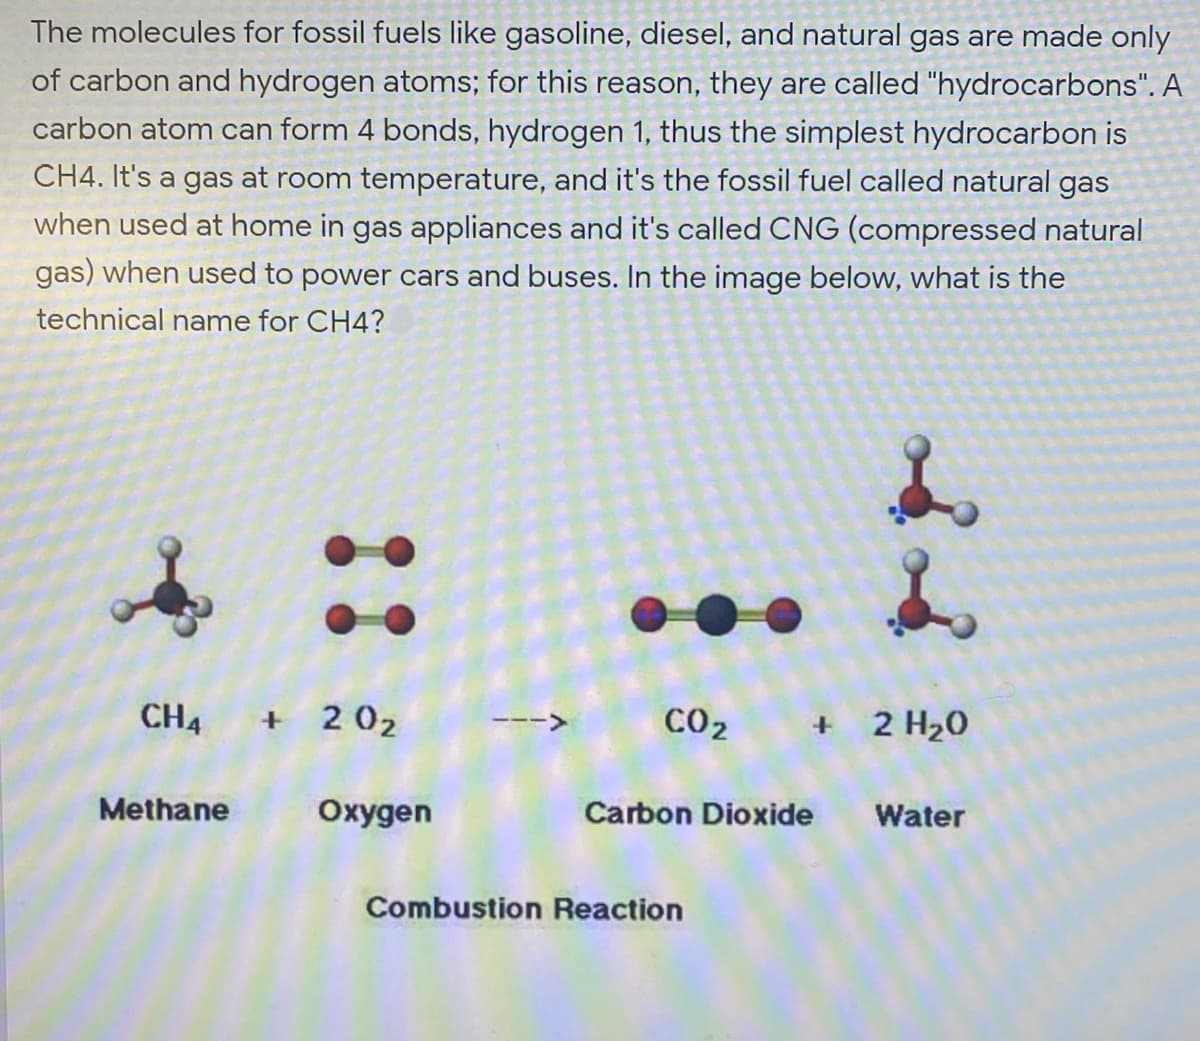 The molecules for fossil fuels like gasoline, diesel, and natural gas are made only
of carbon and hydrogen atoms; for this reason, they are called "hydrocarbons". A
carbon atom can form 4 bonds, hydrogen 1, thus the simplest hydrocarbon is
CH4. It's a gas at room temperature, and it's the fossil fuel called natural gas
when used at home in gas appliances and it's called CNG (compressed natural
gas) when used to power cars and buses. In the image below, what is the
technical name for CH4?
CH4 + 202
CO2
+ 2 H20
<>
Methane
Охудen
Carbon Dioxide
Water
Combustion Reaction
::
